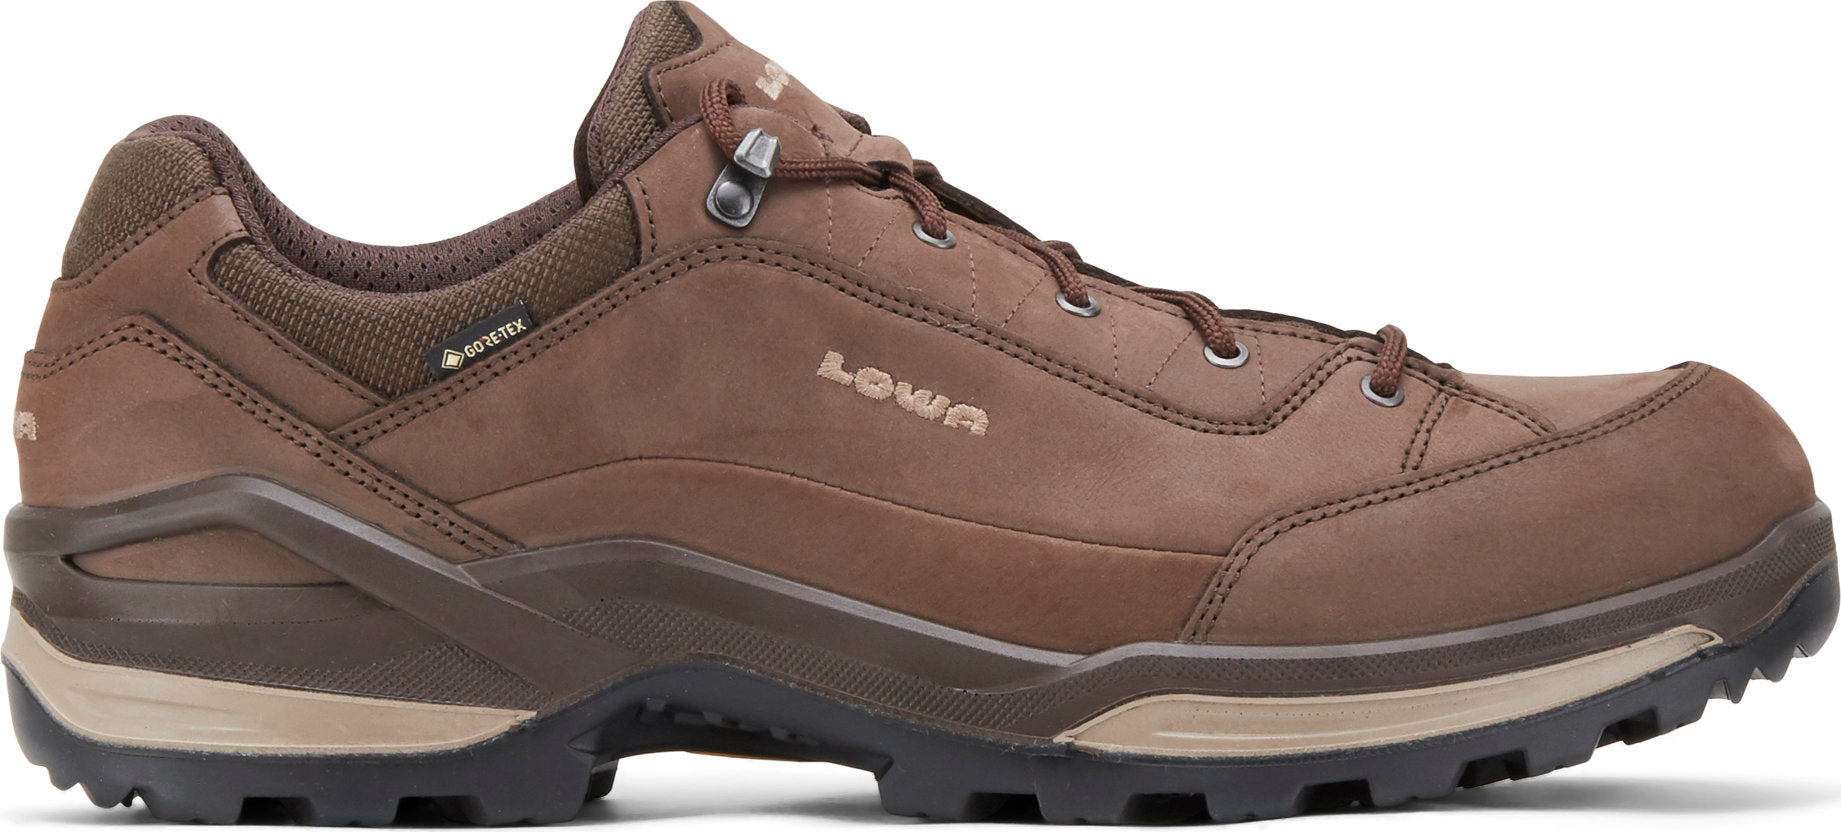 BOOTS that bring your FAMILY out for a WALK…LOWA Boots | Share the Outdoors